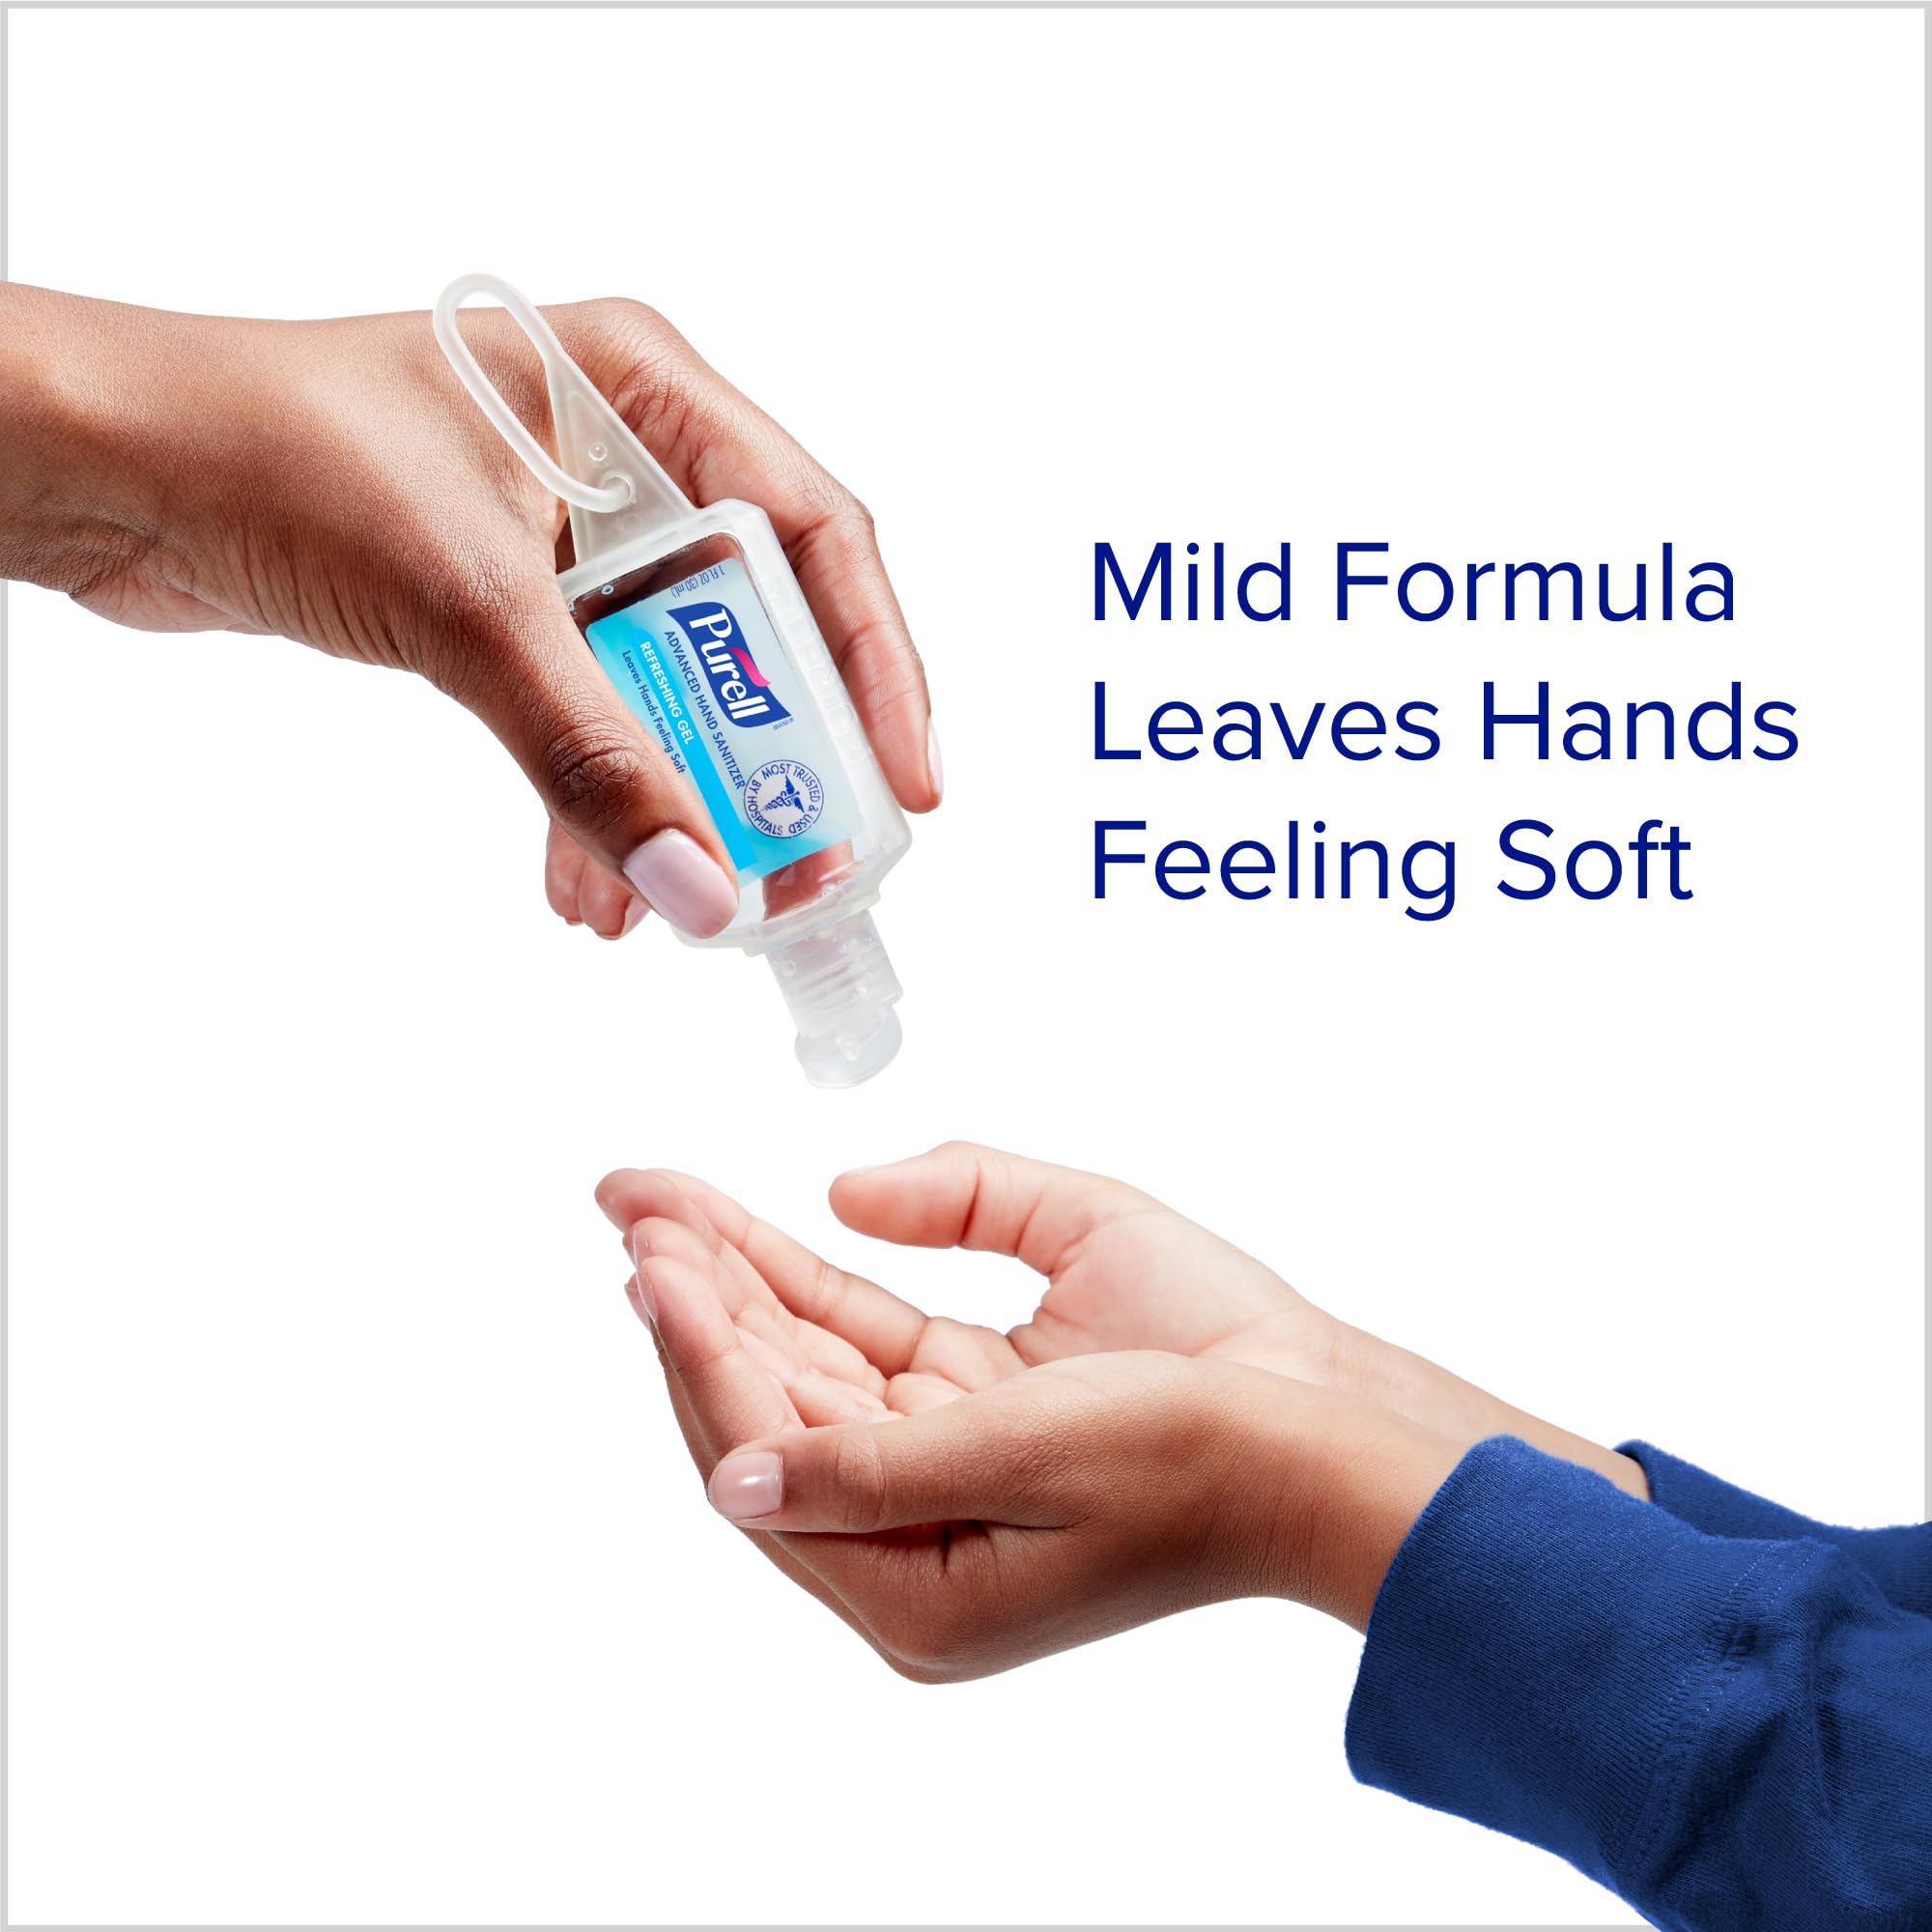 Purell Advanced Hand Sanitizer Variety Pack, Naturals and Refreshing Gel, 1 Fl Oz Travel Size Flip-Cap Bottle with Jelly Wrap Carrier (Pack of 8), 3900-09-ECSC